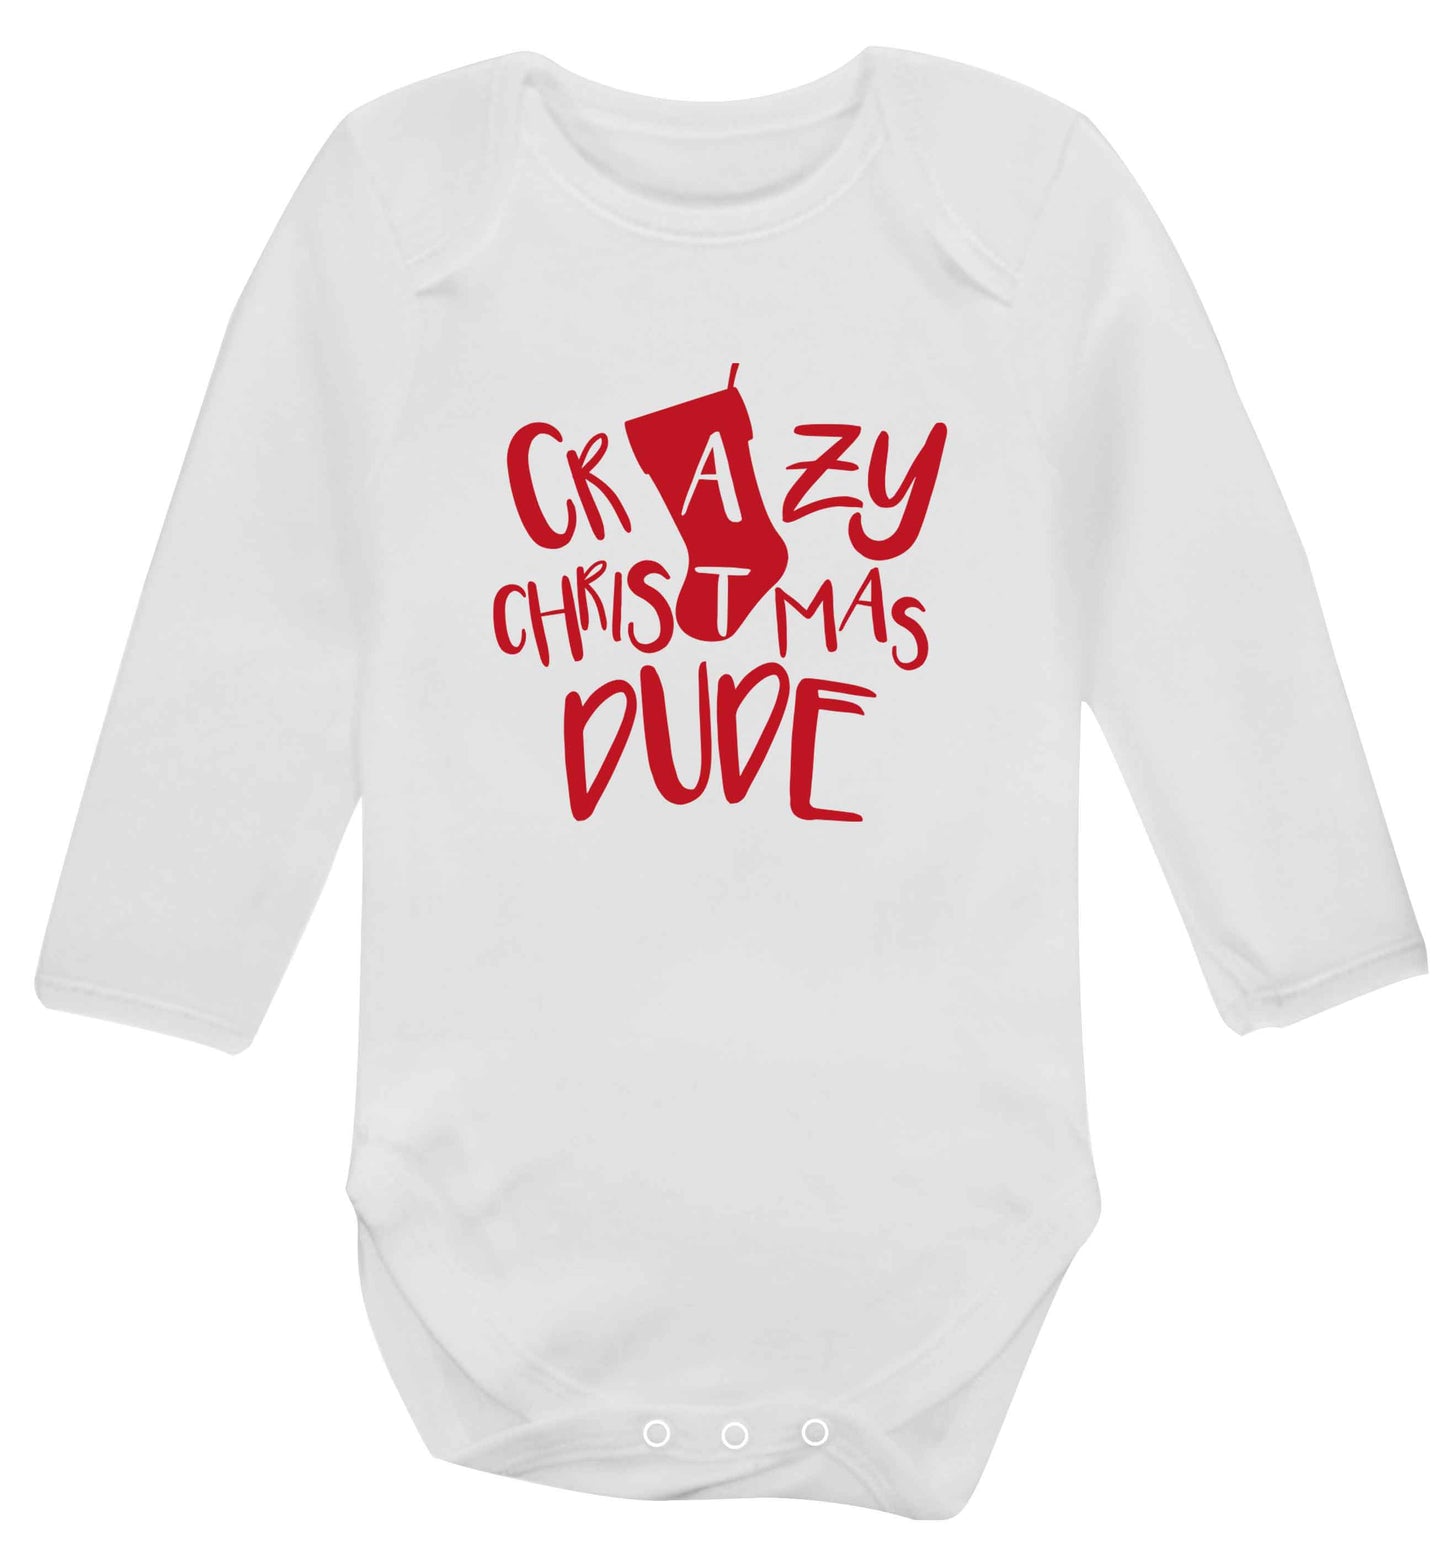 Crazy Christmas Dude baby vest long sleeved white 6-12 months